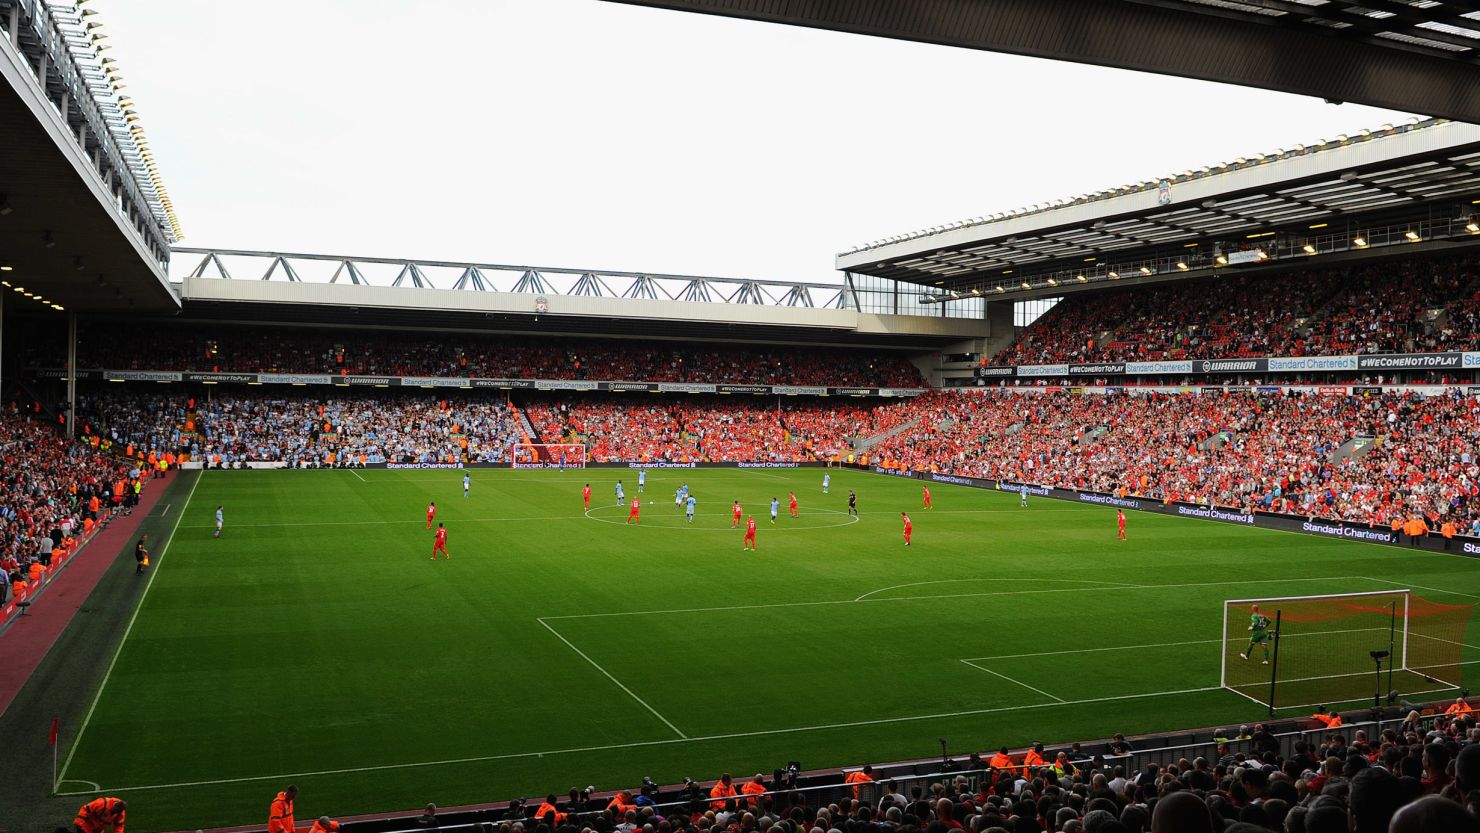 Liverpool's Anfield Stadium has a current capacity of 45,000 but will be extended to 60,000 under new plans.